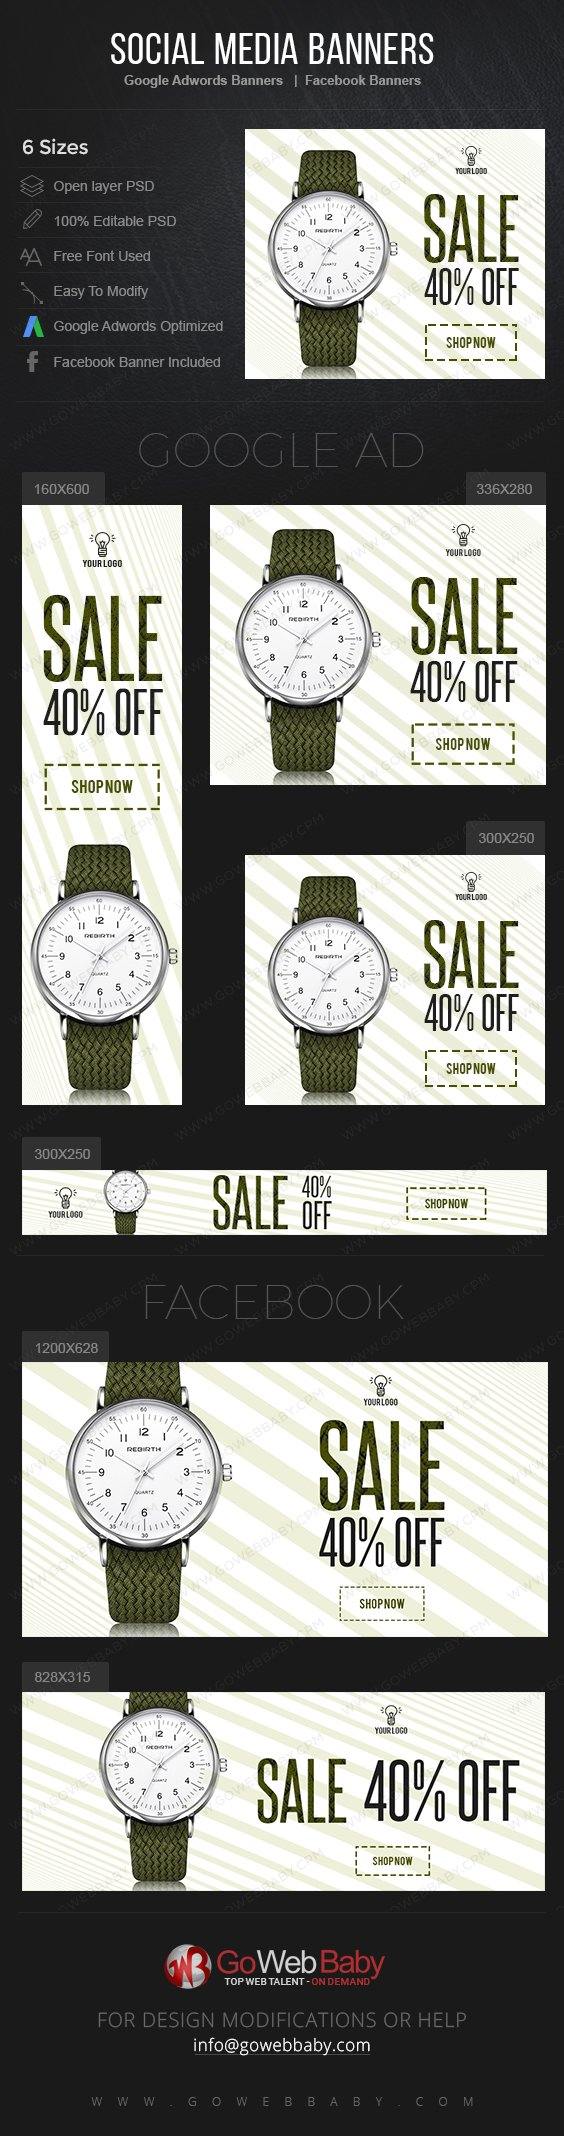 Google Adwords Display Banner With Facebook Banners - Elegant Watch For Men - GoWebBaby.Com